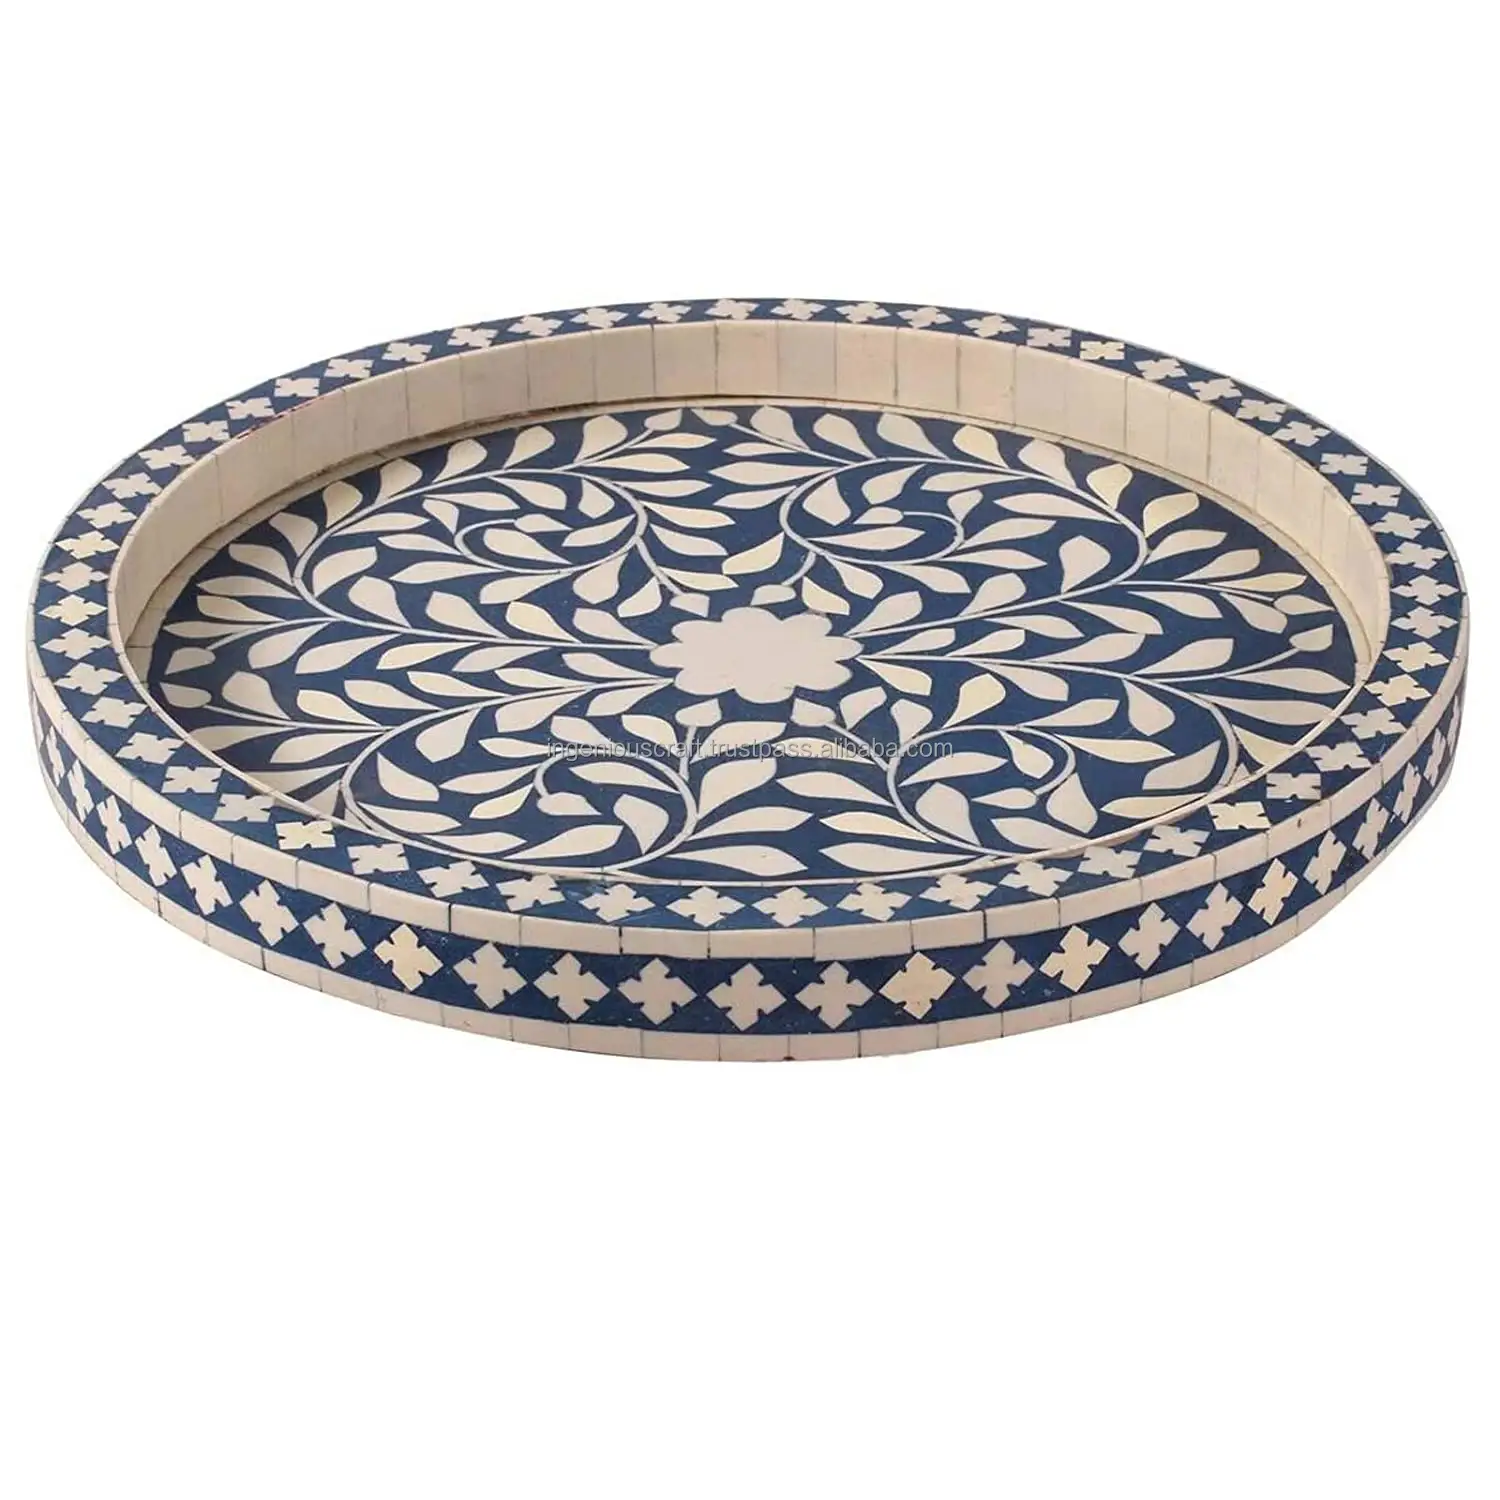 Bone Inlay Floral Design Serving Tray/simple Decorative Tray Best Quality Round Blue Round BONE